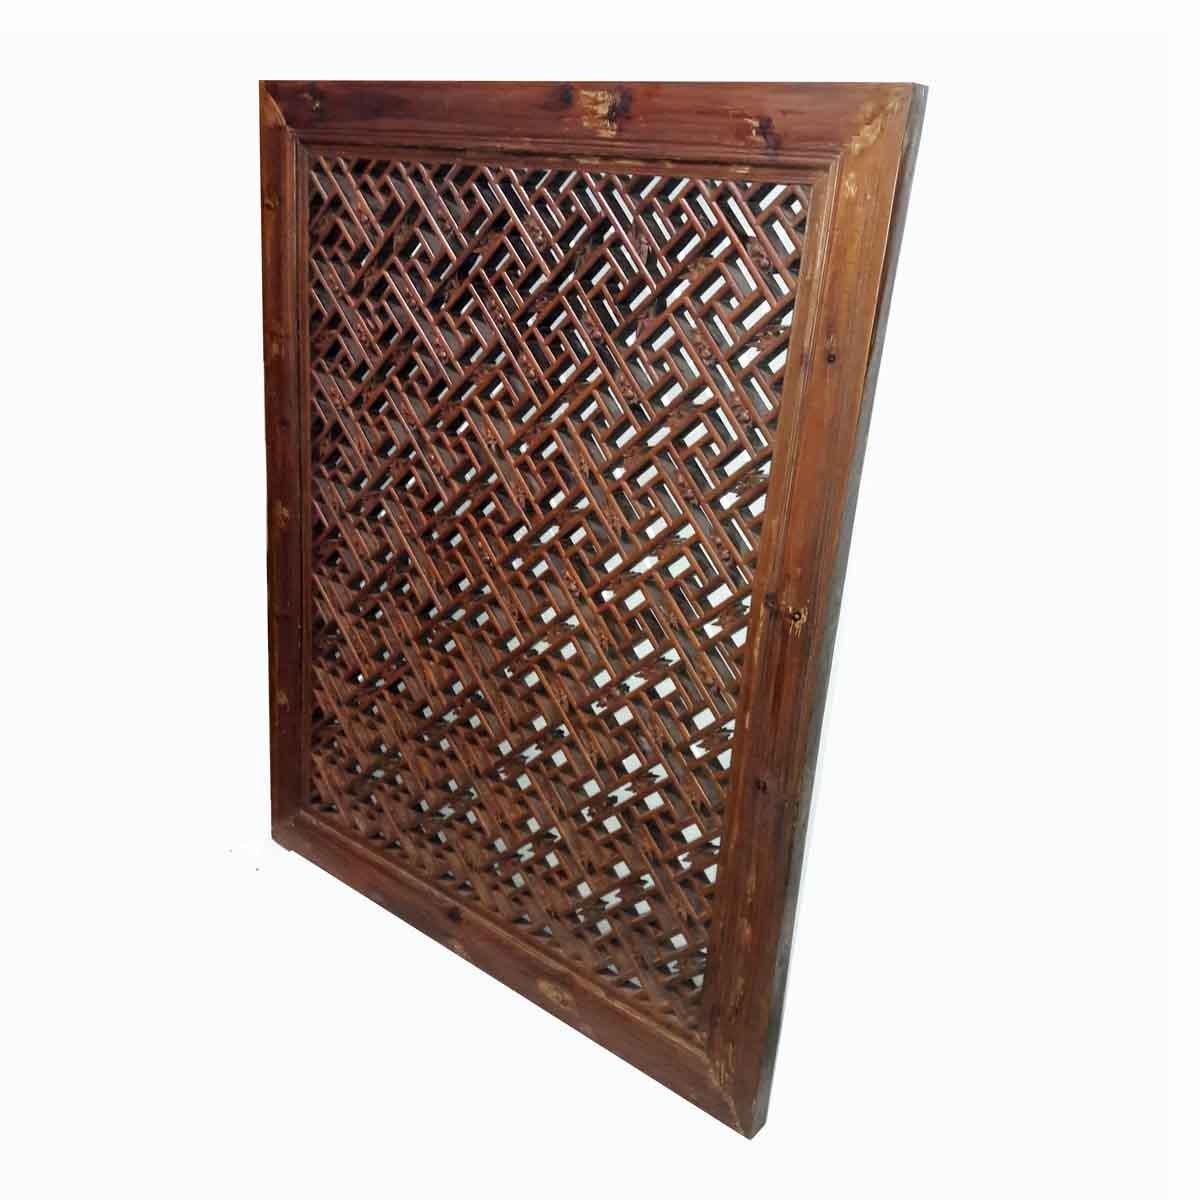 An antique window screen from Sianxi, China, Mid-19th Century. 
Solid peachwood in dark finish with intricate floral hand-carvings in diagonal pattern

Measures : 38 inches wide, 46.5 inches high, 2 inches deep.